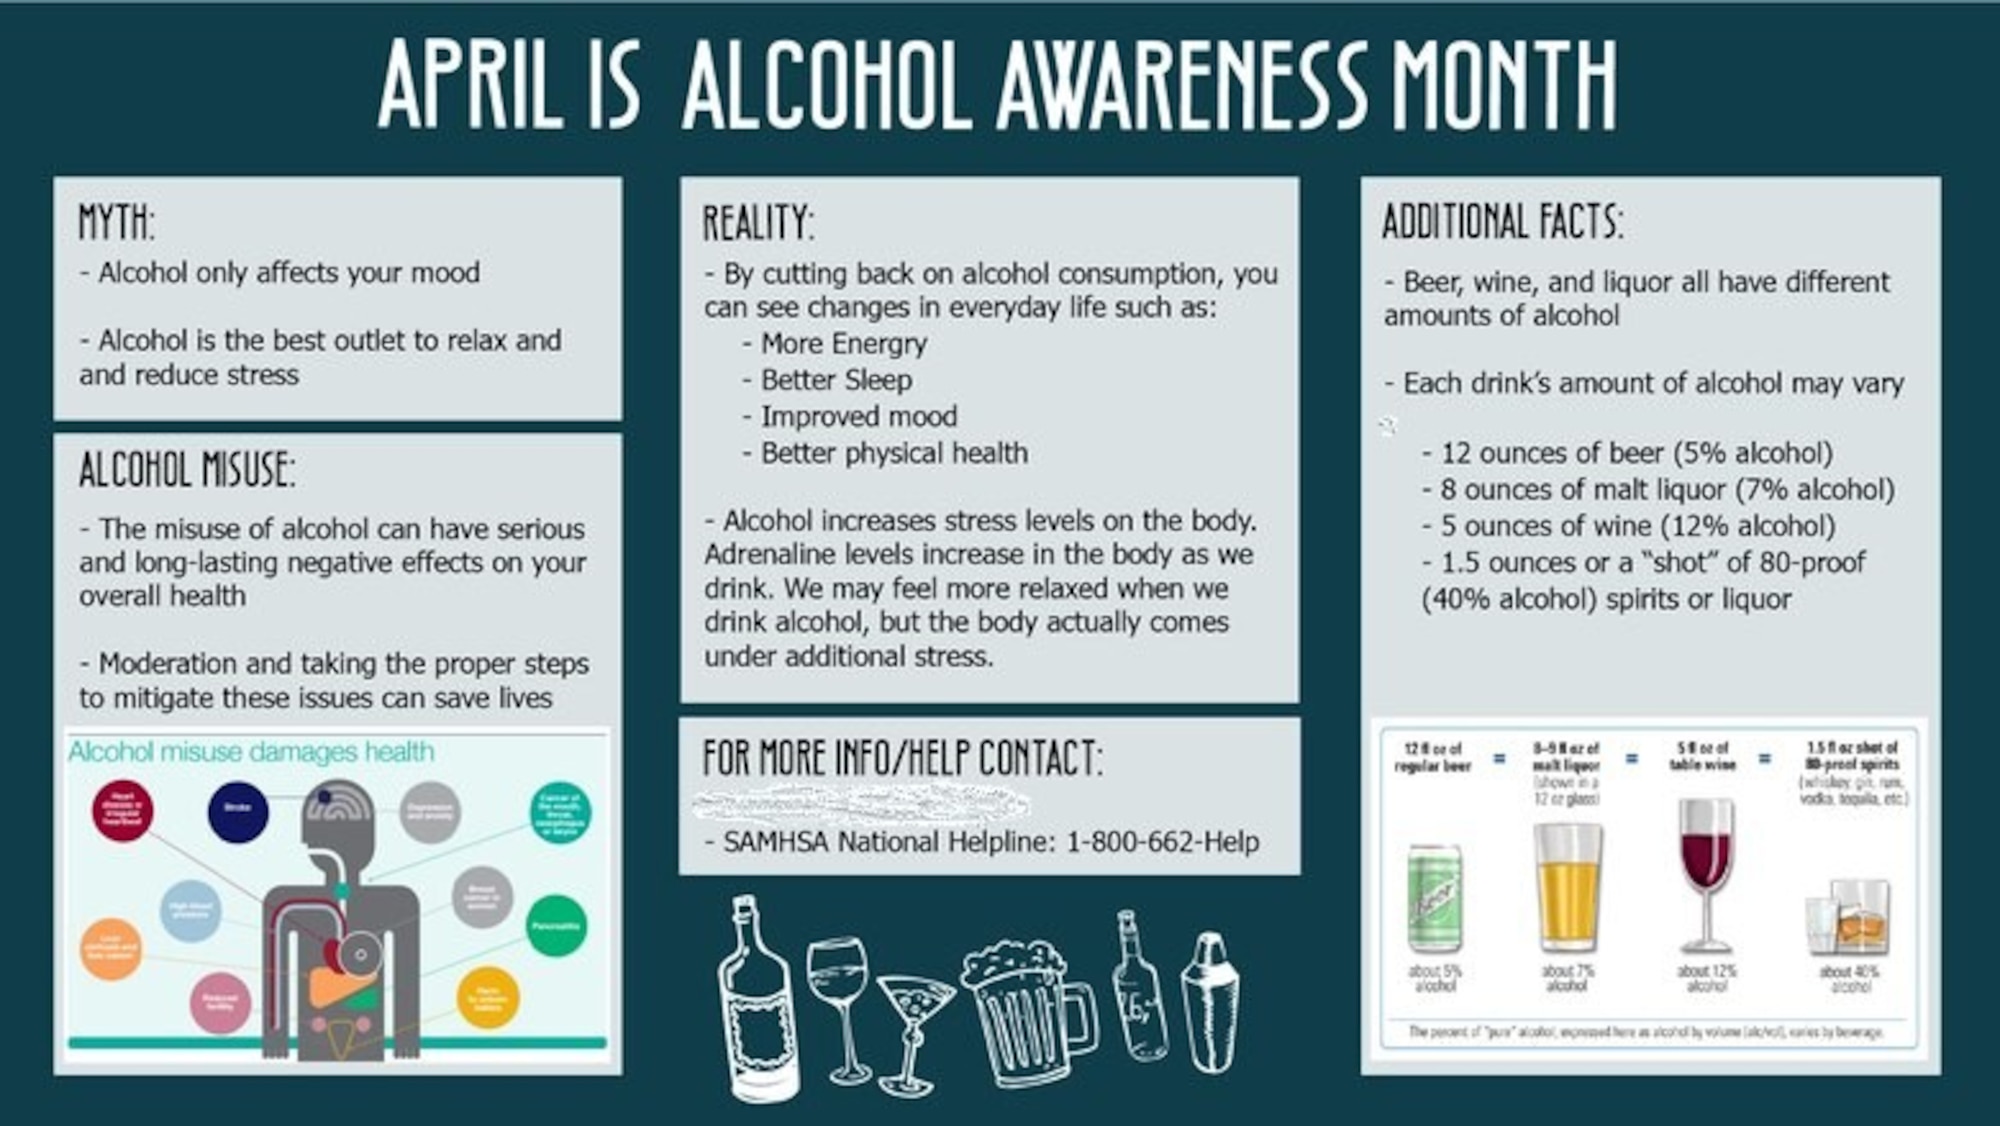 Alcohol Awareness Month occurs each April in part because of how easily problems associated with alcohol use can occur anytime and anywhere alcohol is consumed. Overall, alcohol use is up since the Covid-19 impact and restrictions began.